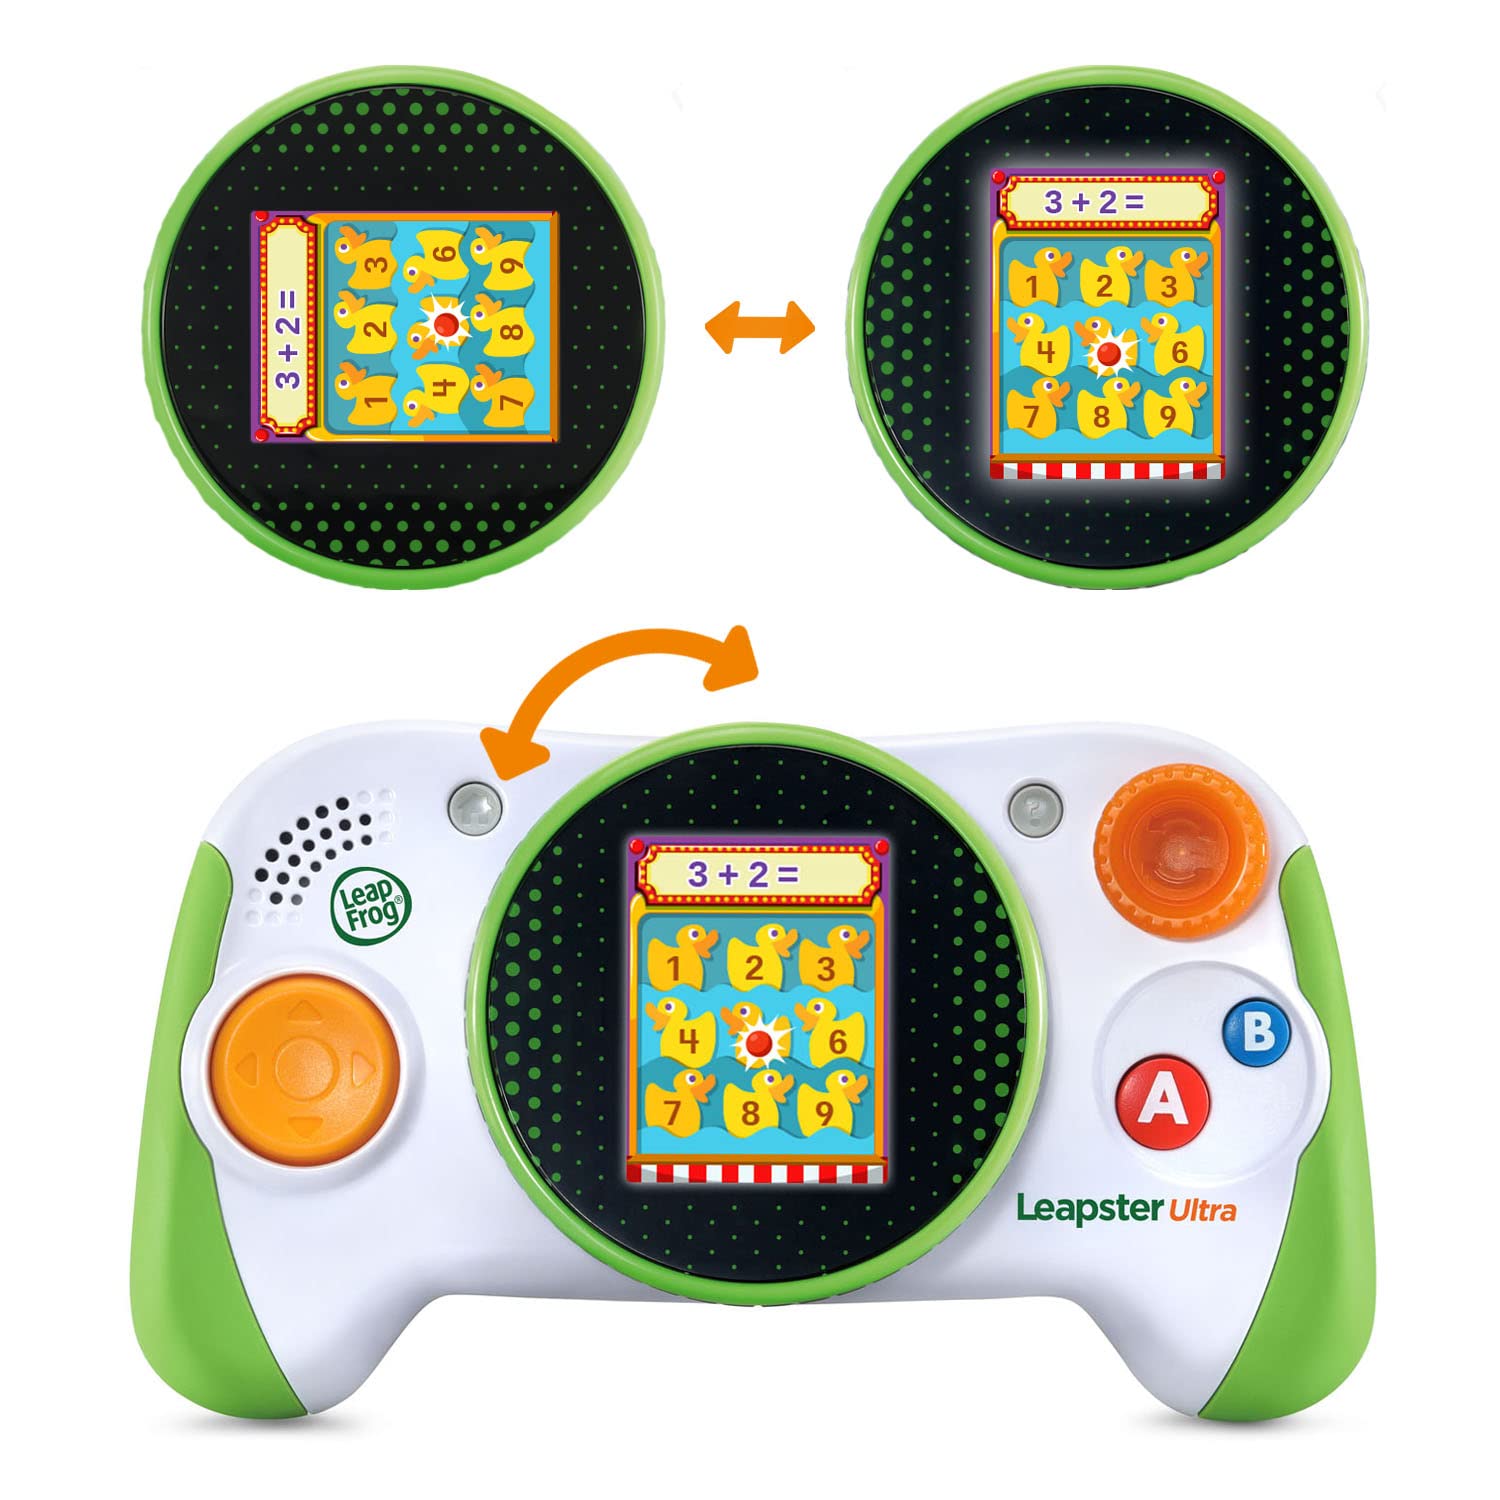 LeapFrog Leapster Ultra Handheld Learning Game Console for Kids Age 4 Years and up